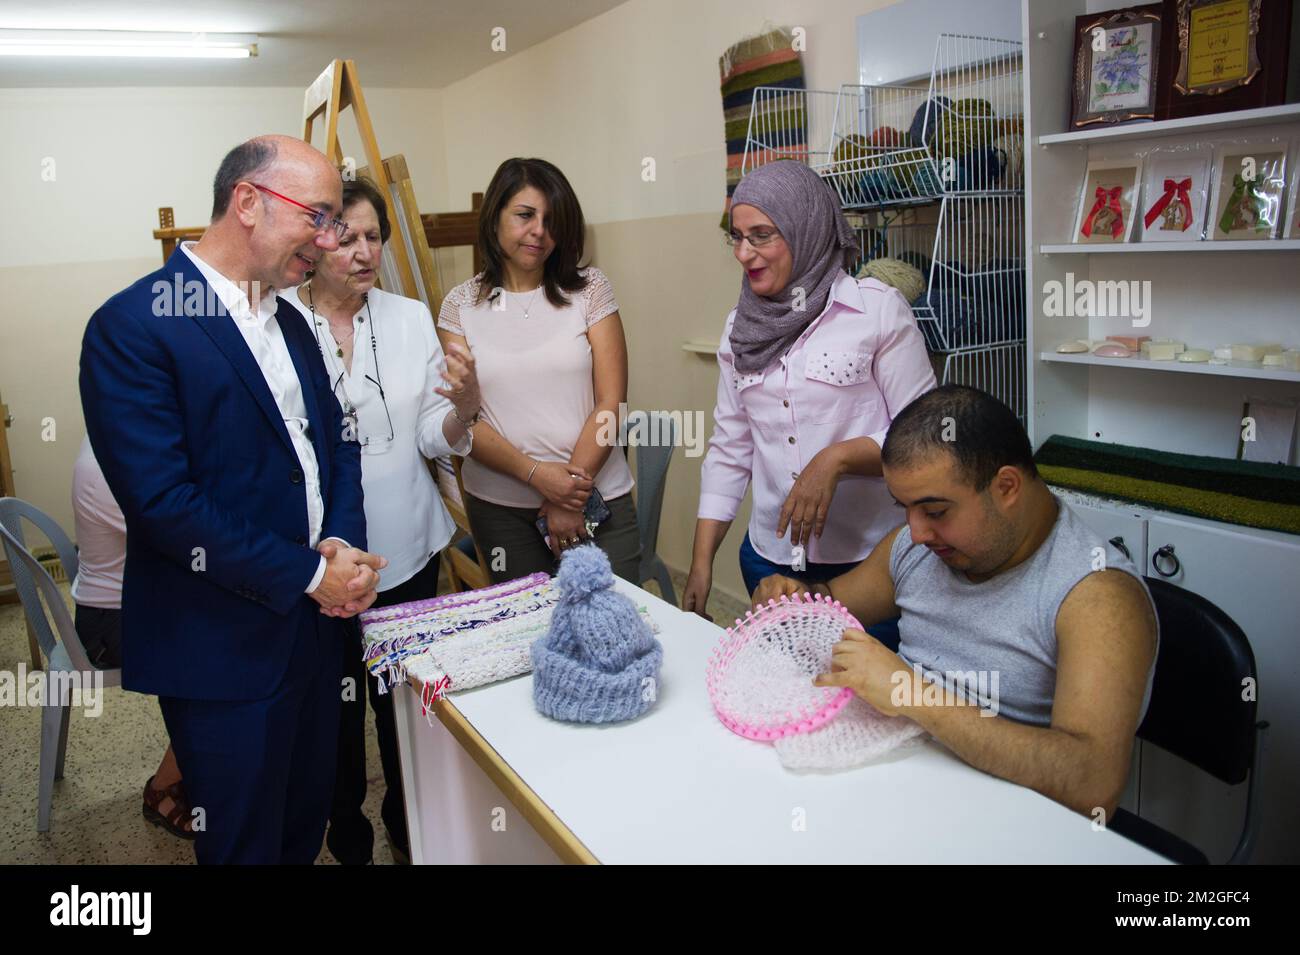 Federation Wallonia - Brussels Minister President Rudy Demotte pictured during a visit of the Al Basma center in Beit Sahour, Bethleem, on the third day of a mission with Brussels minister-president Demotte in Israel and the Palestinian Territories, Tuesday 03 July 2018. BELGA PHOTO JOHANNA GERON Stock Photo